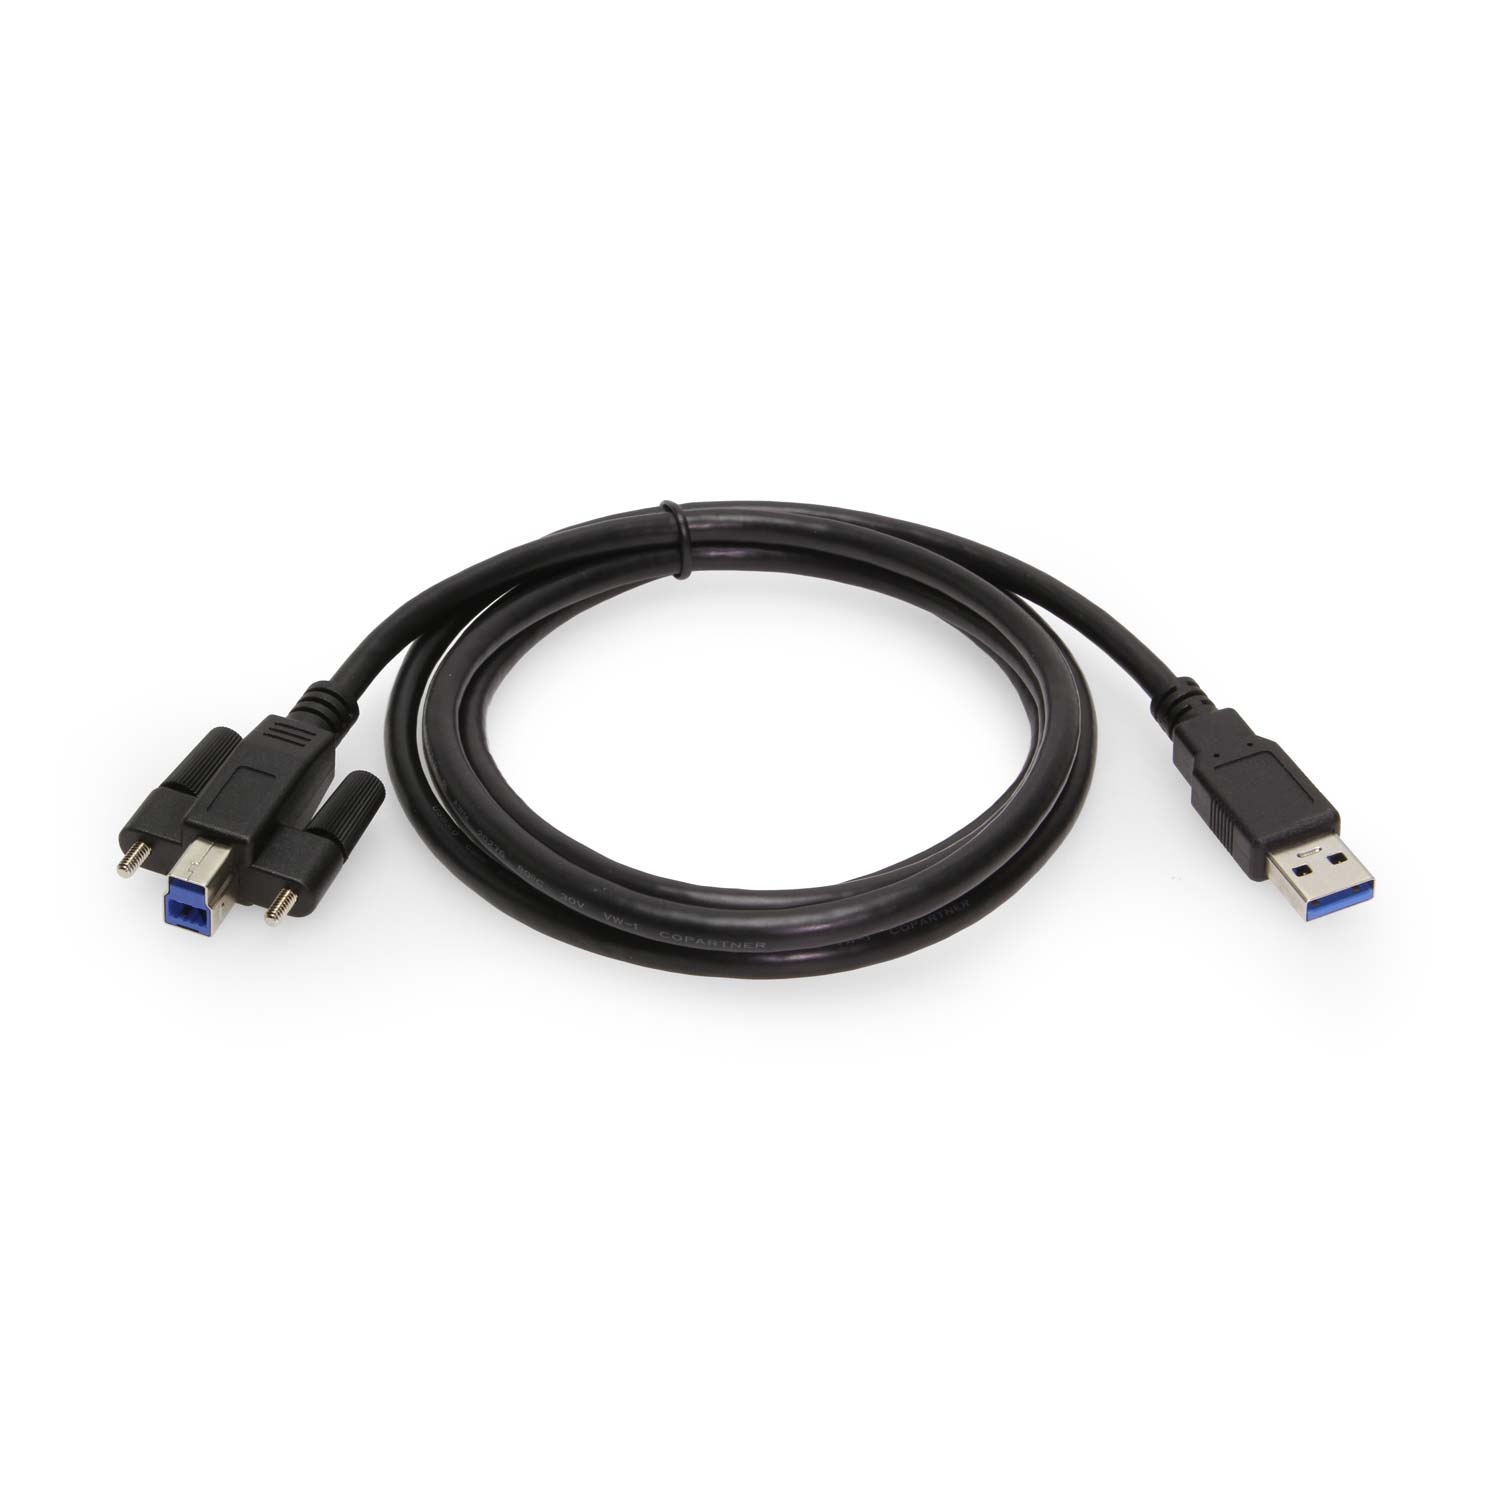 USB 3.2 Gen 1 Type-A to Type-B SuperSpeed Cable - 15ft